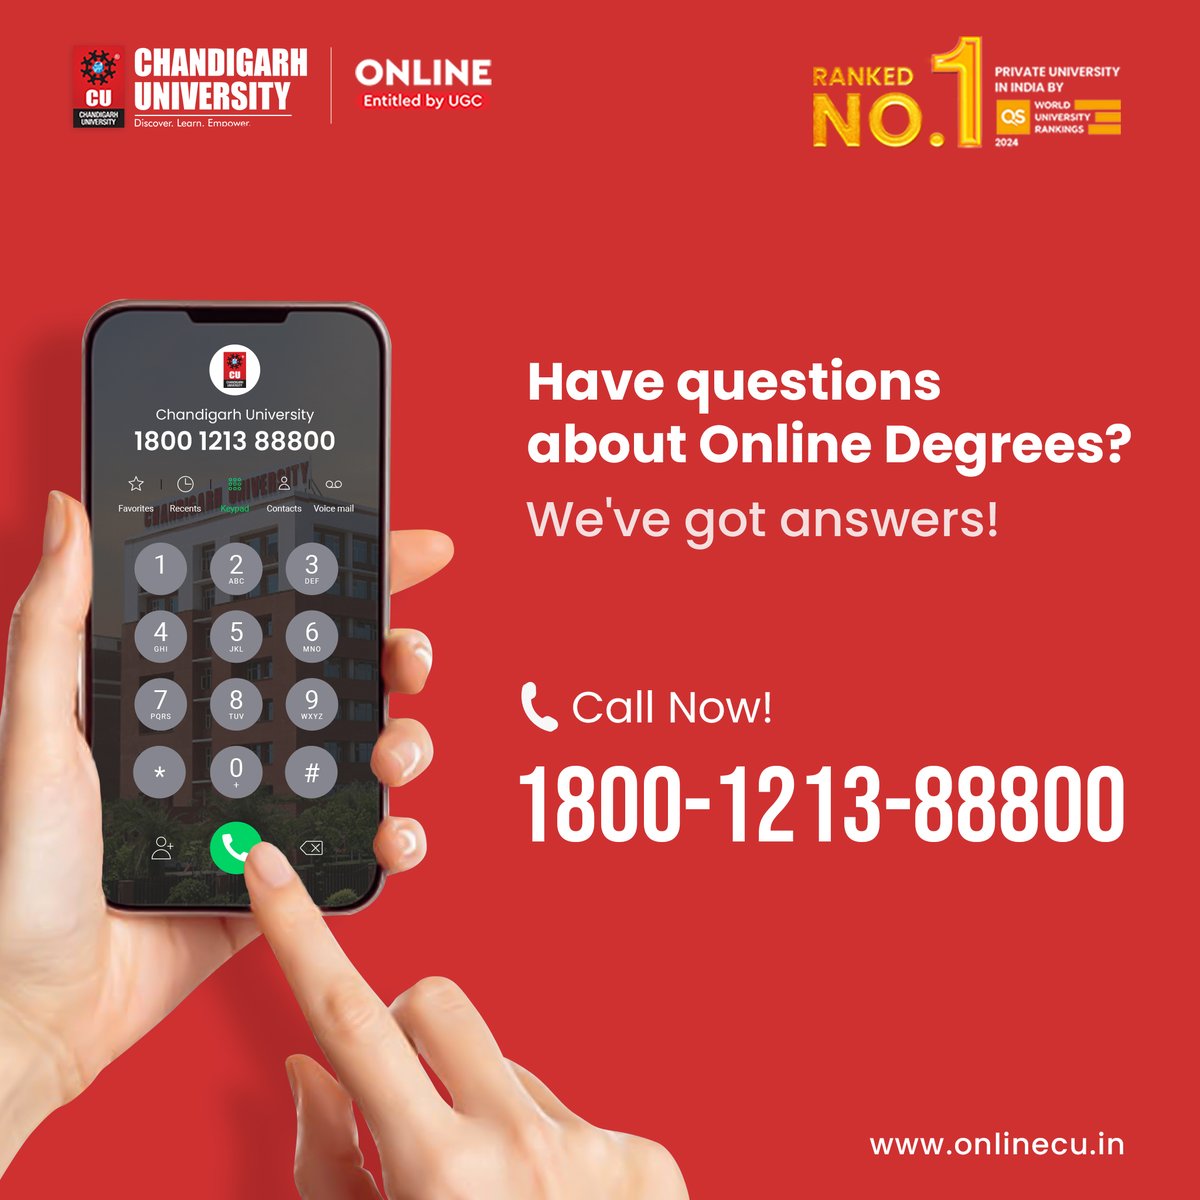 Curious about online degrees? We've got answers! Call 1800121388800 today and explore the world of online education with #ChandigarhUniversityOnline Your future, your decisions! 

Apply for online degree programs at:- apply.onlinecu.in/index.aspx?typ…

#onlineCU #OnlineDegrees